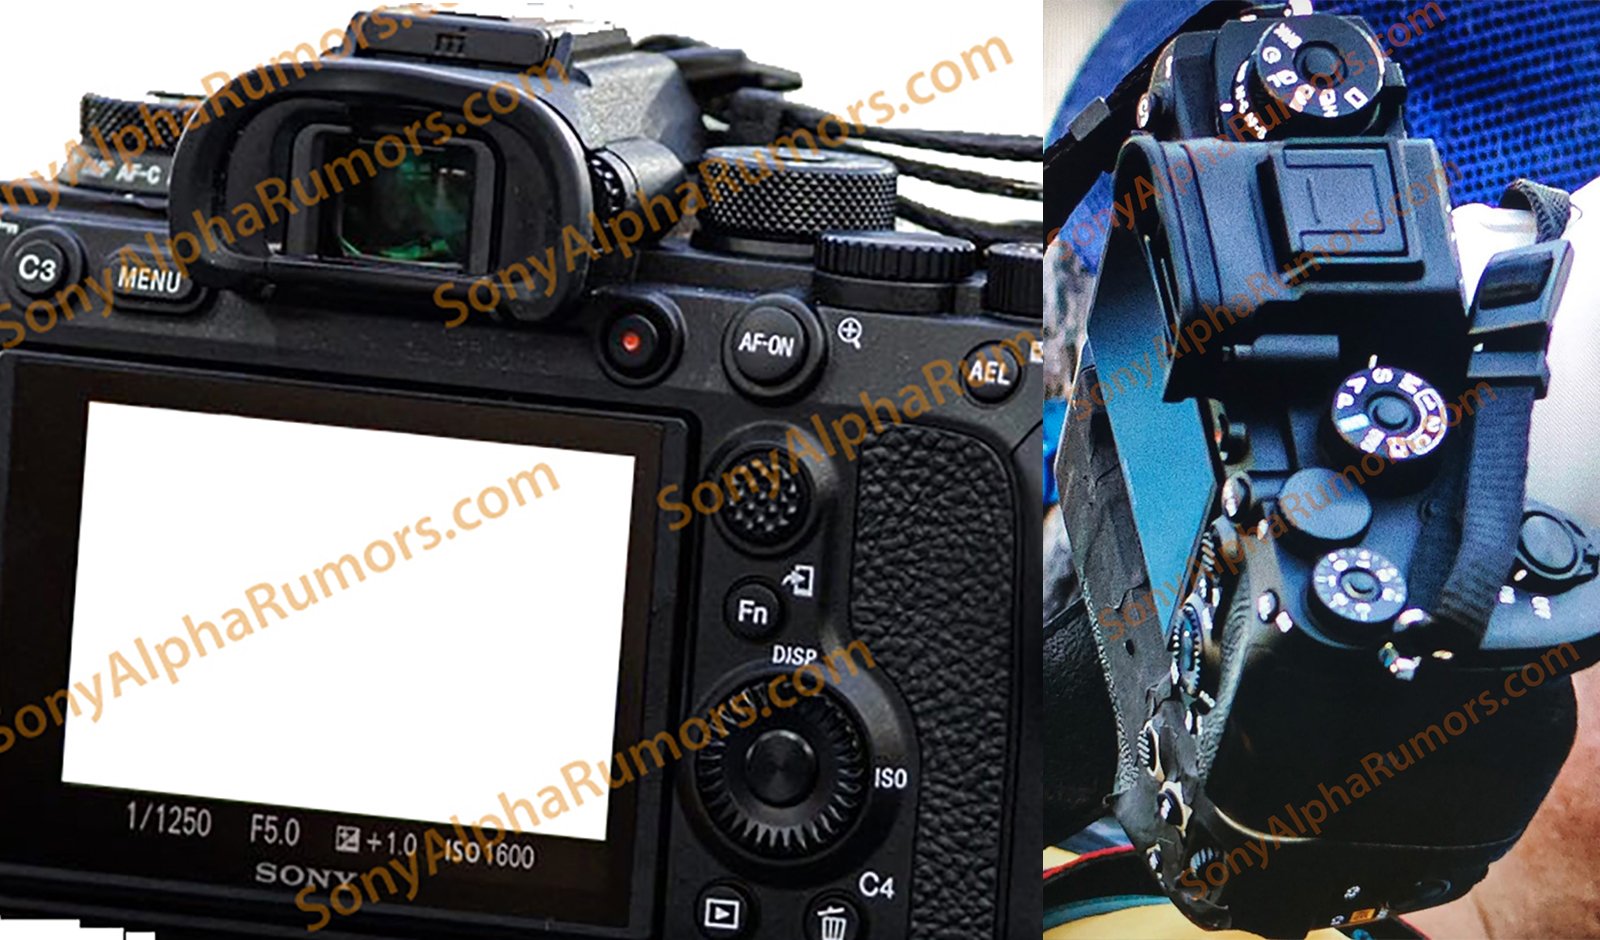 Leaked Photos Give Us Our First Look at the Unreleased Sony a9 II